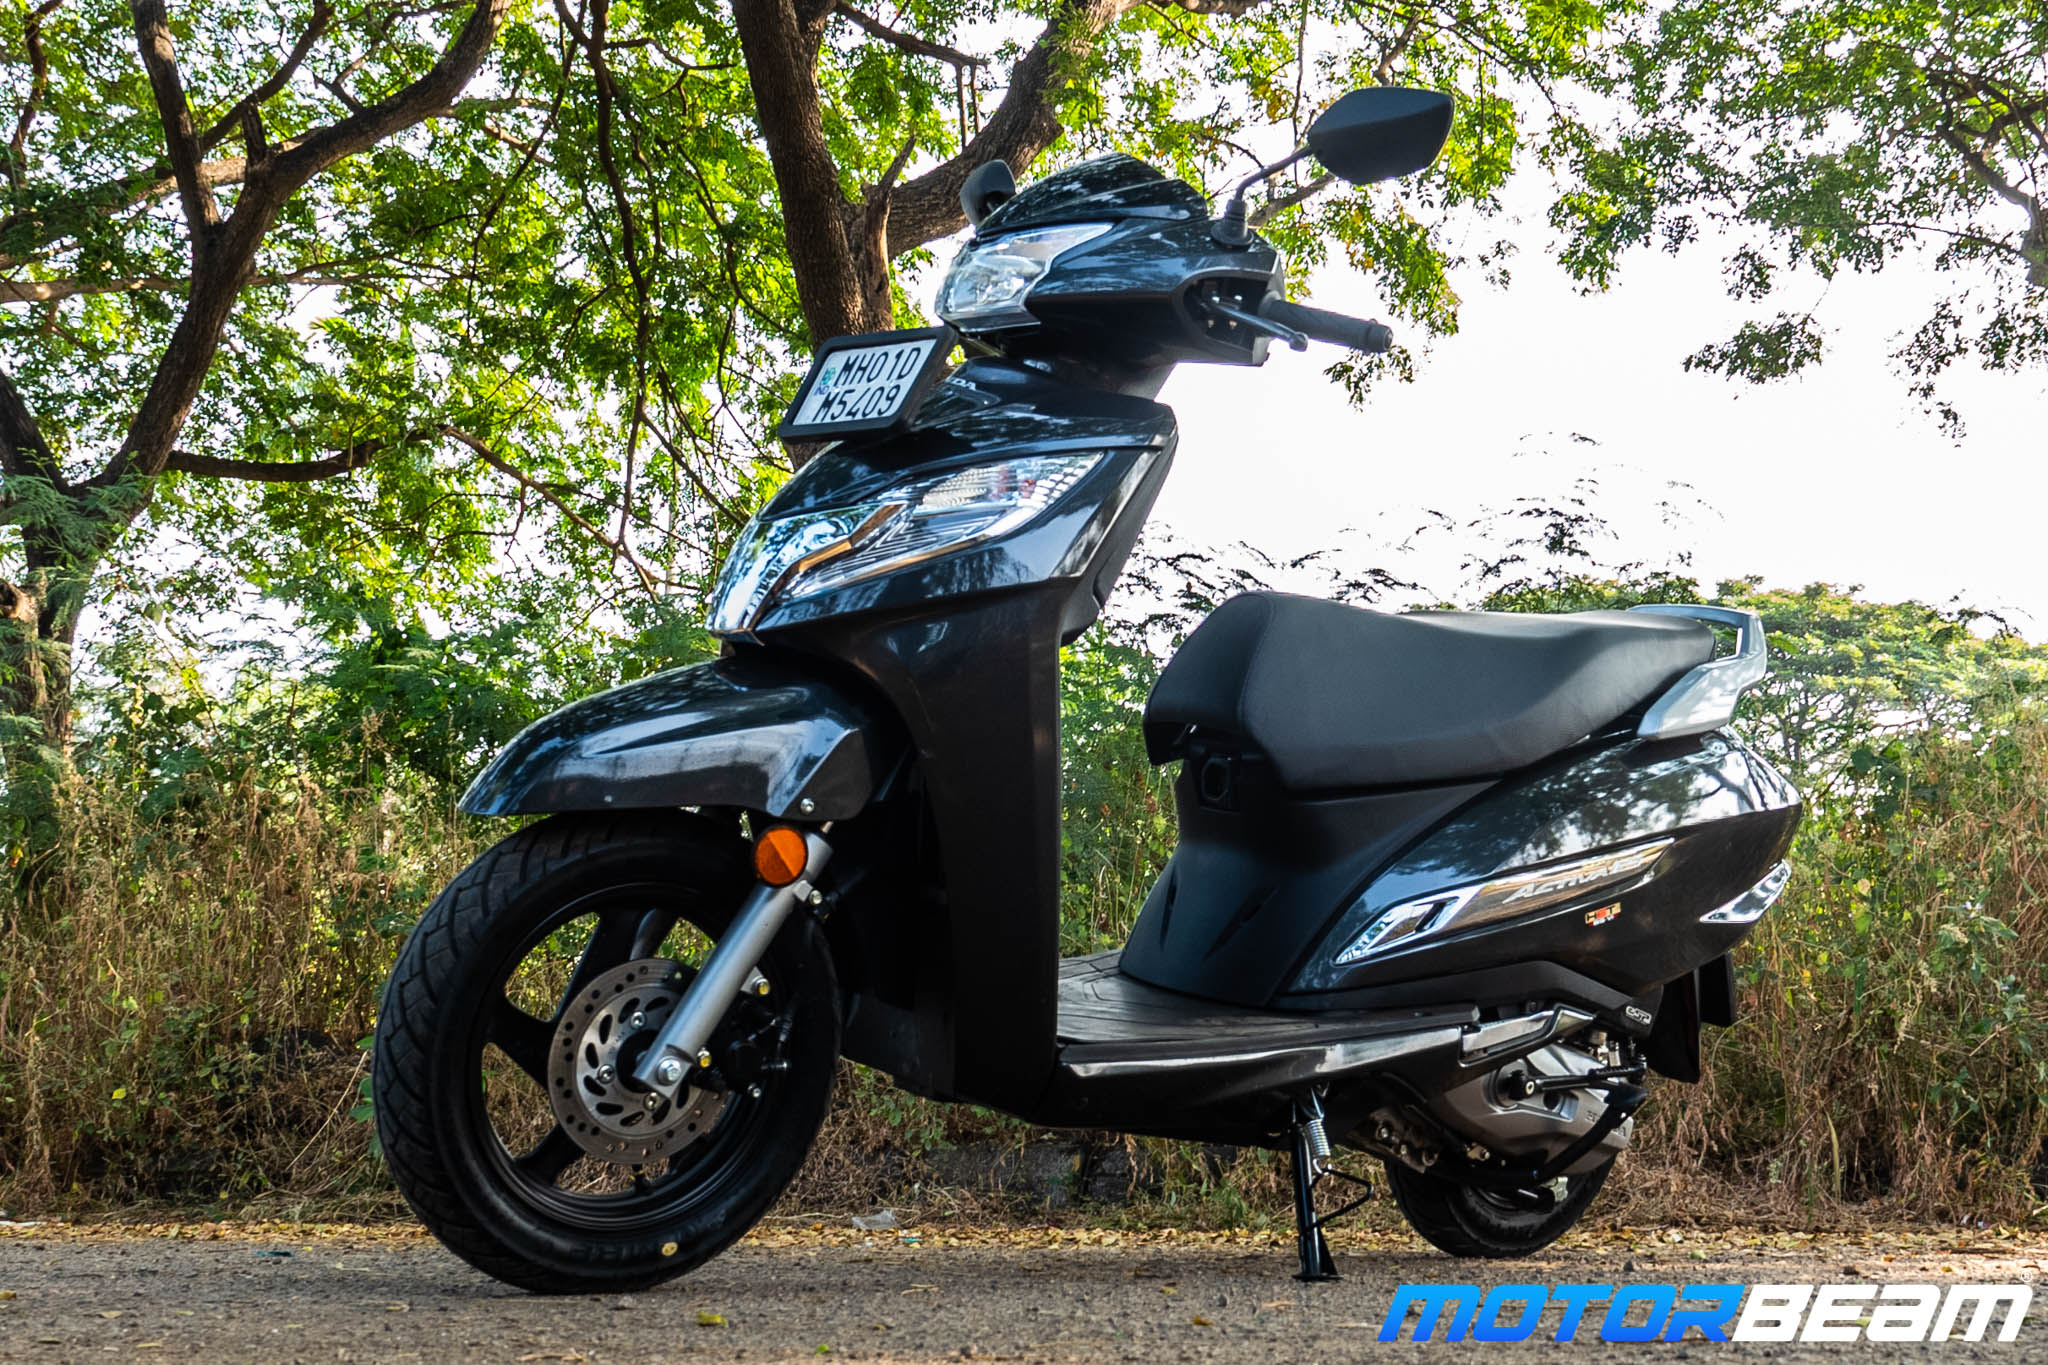 Activa 125 Bs6 Price In India